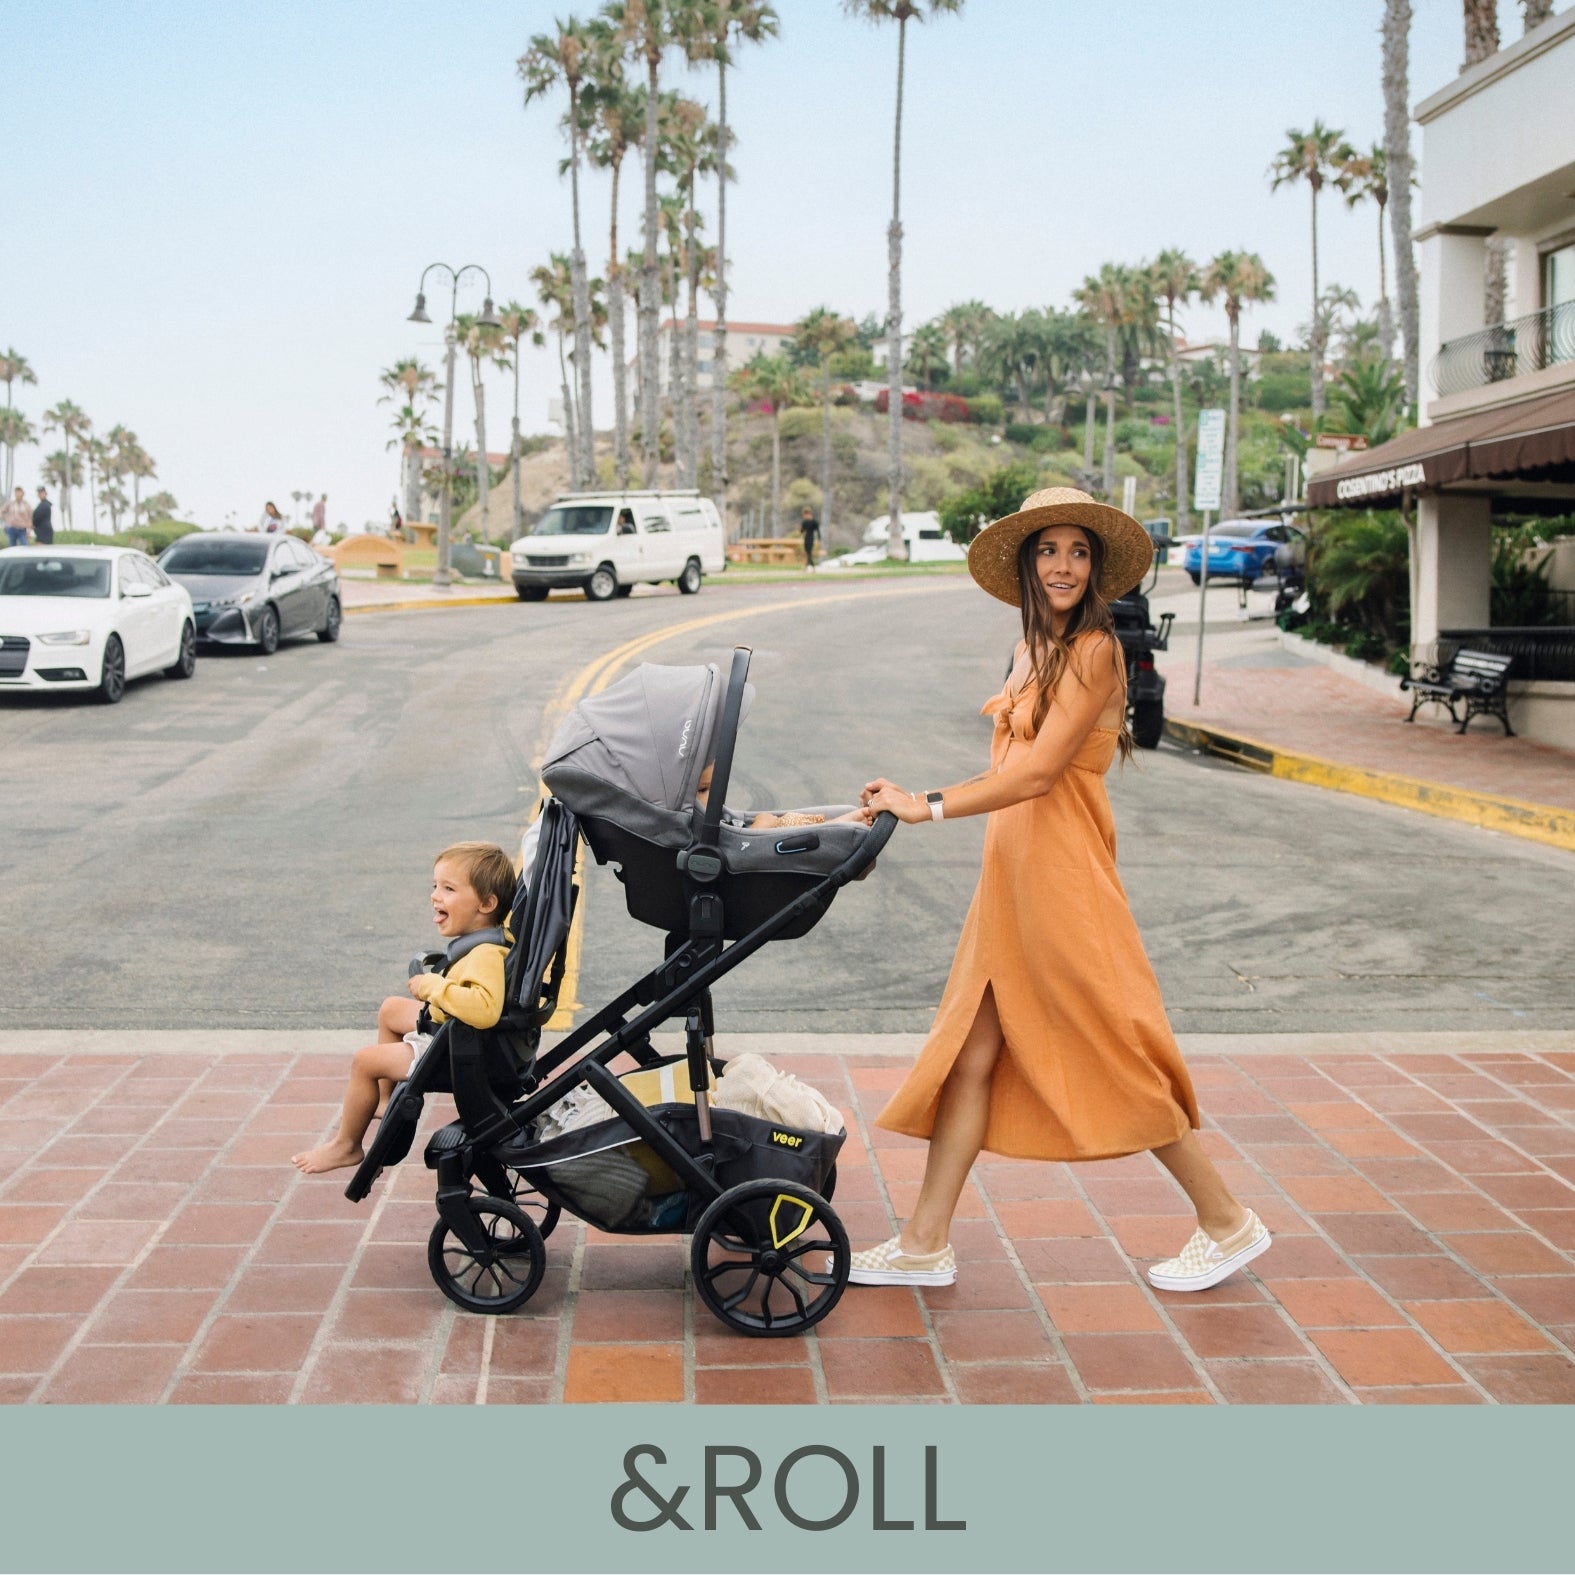 Car seats compatible with Veer &Roll Stroller